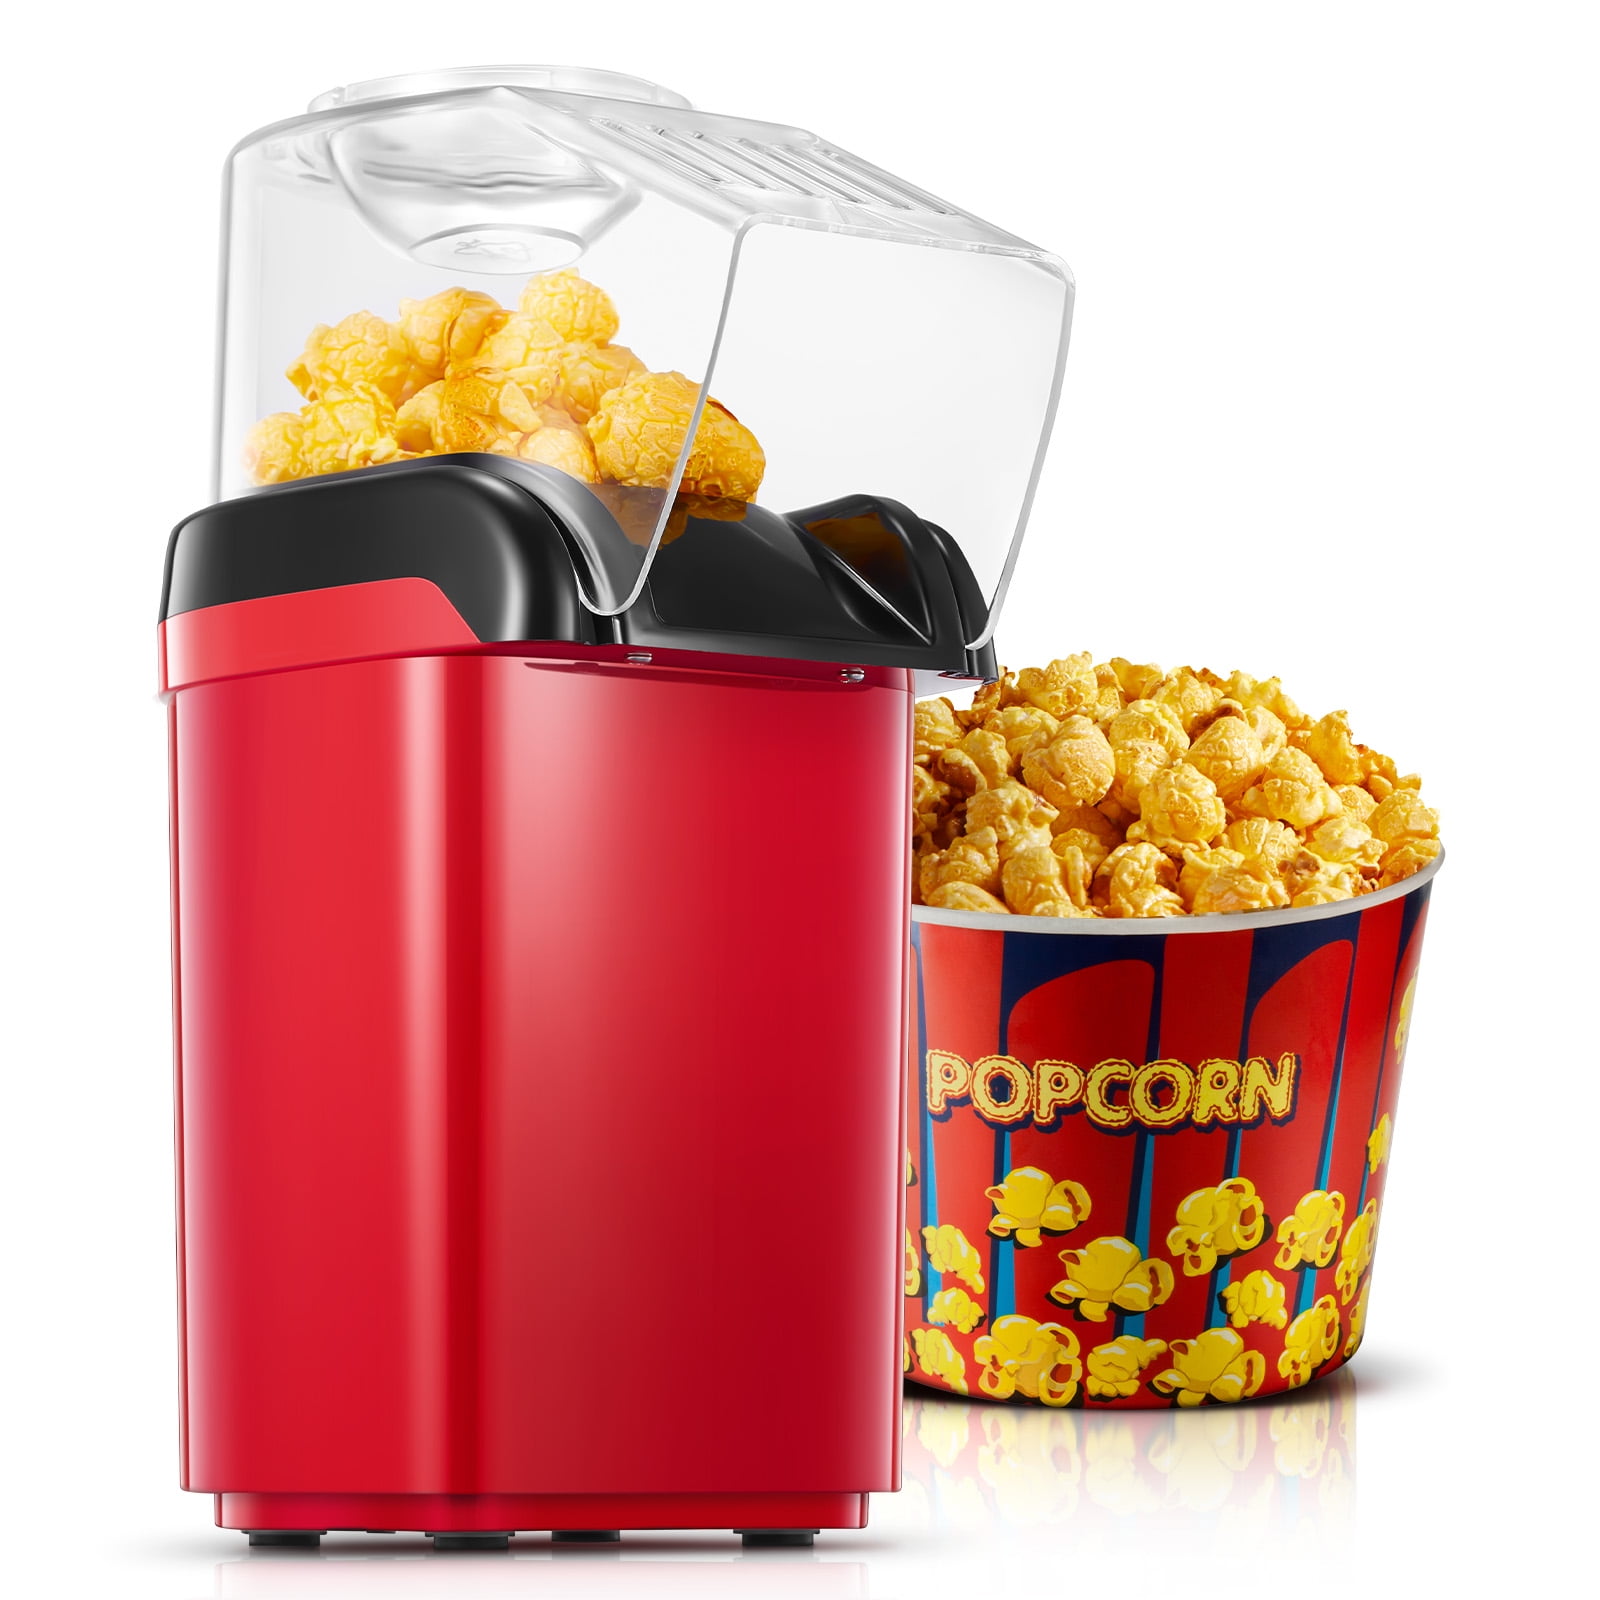 AICOOK Hot Air Popcorn Popper, 1400W, Aqua and red, Popcorn Maker With